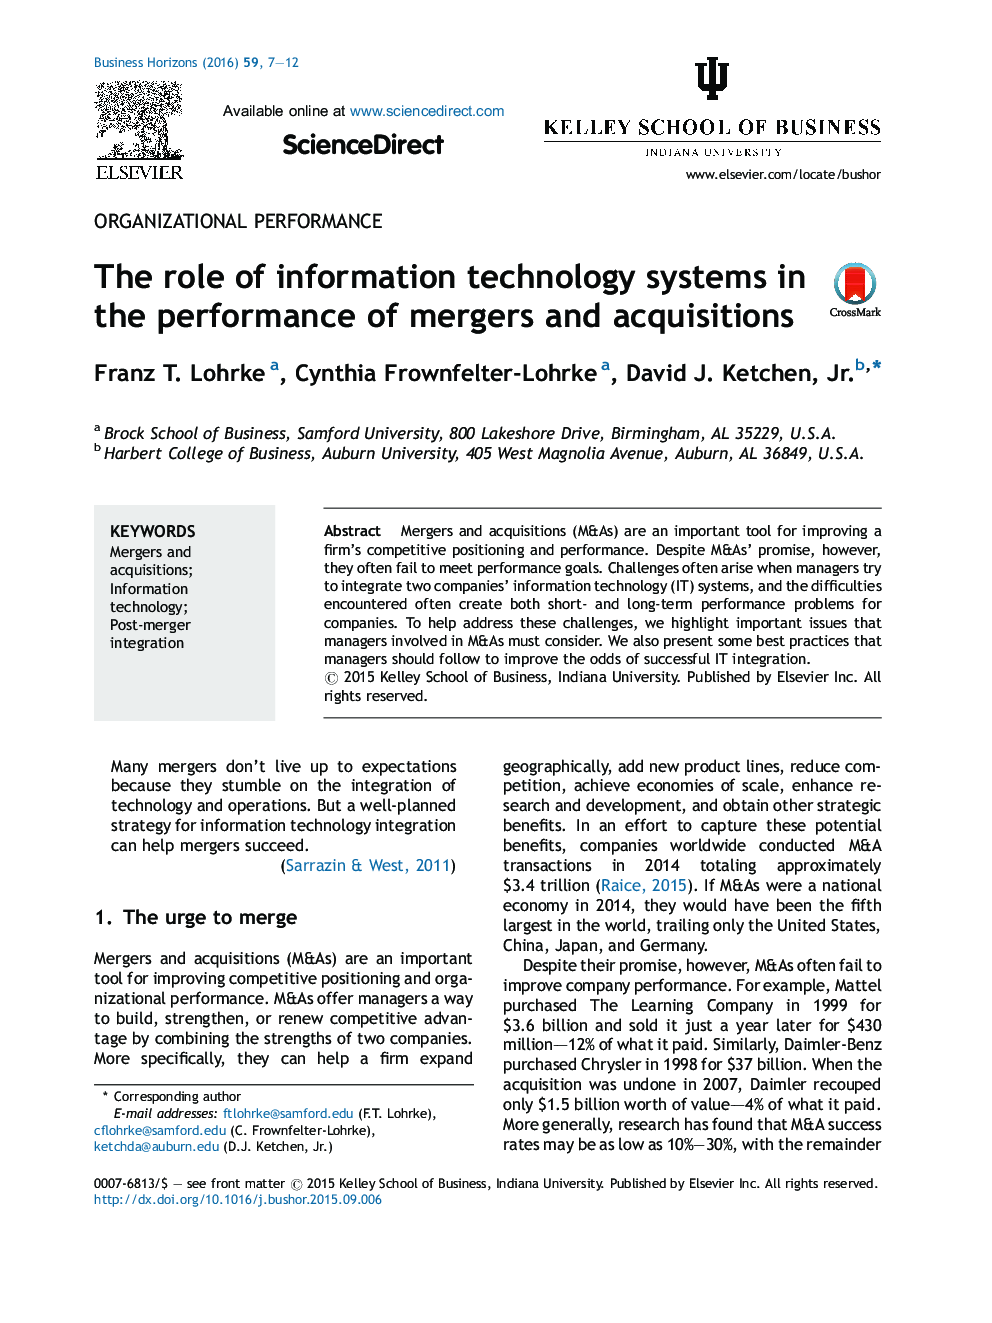 The role of information technology systems in the performance of mergers and acquisitions